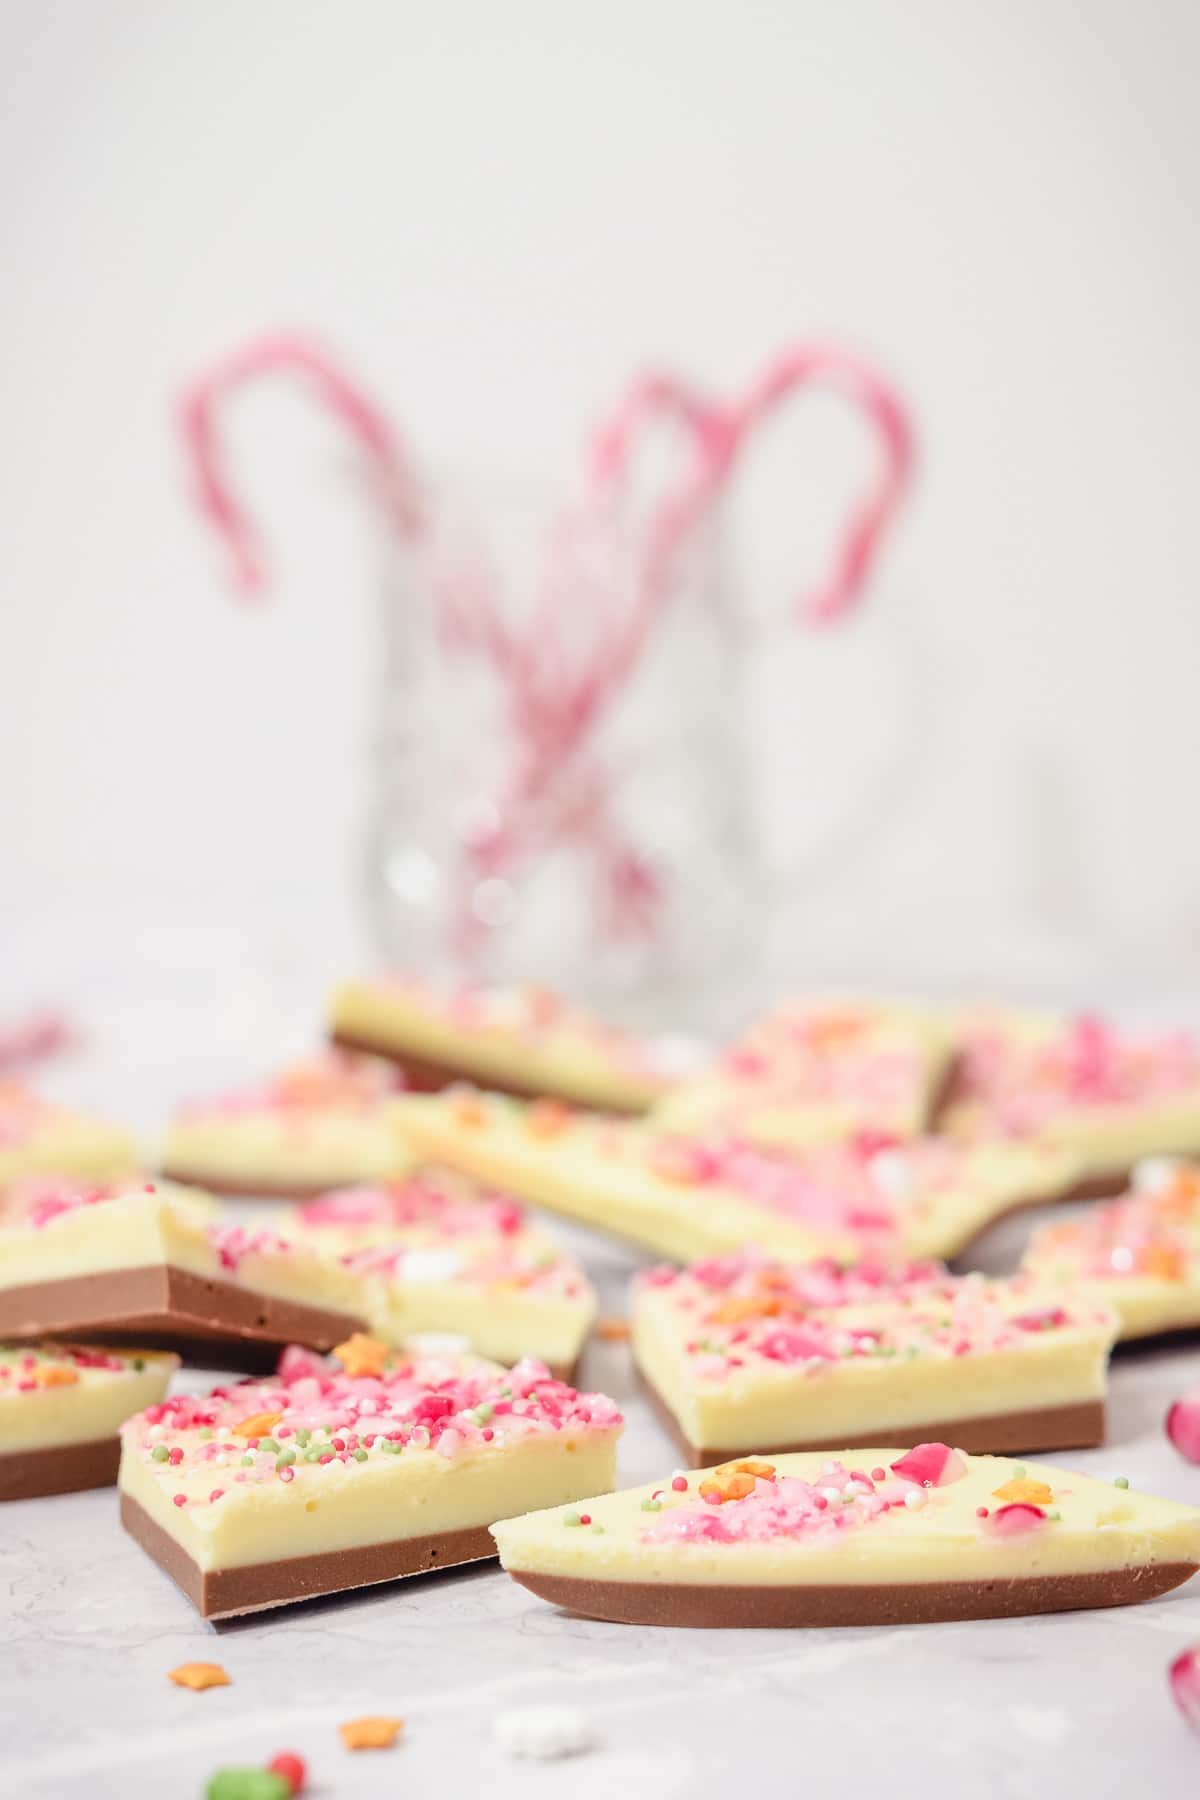 White chocolate peppermint Christmas bark pieces with candy canes in a jar